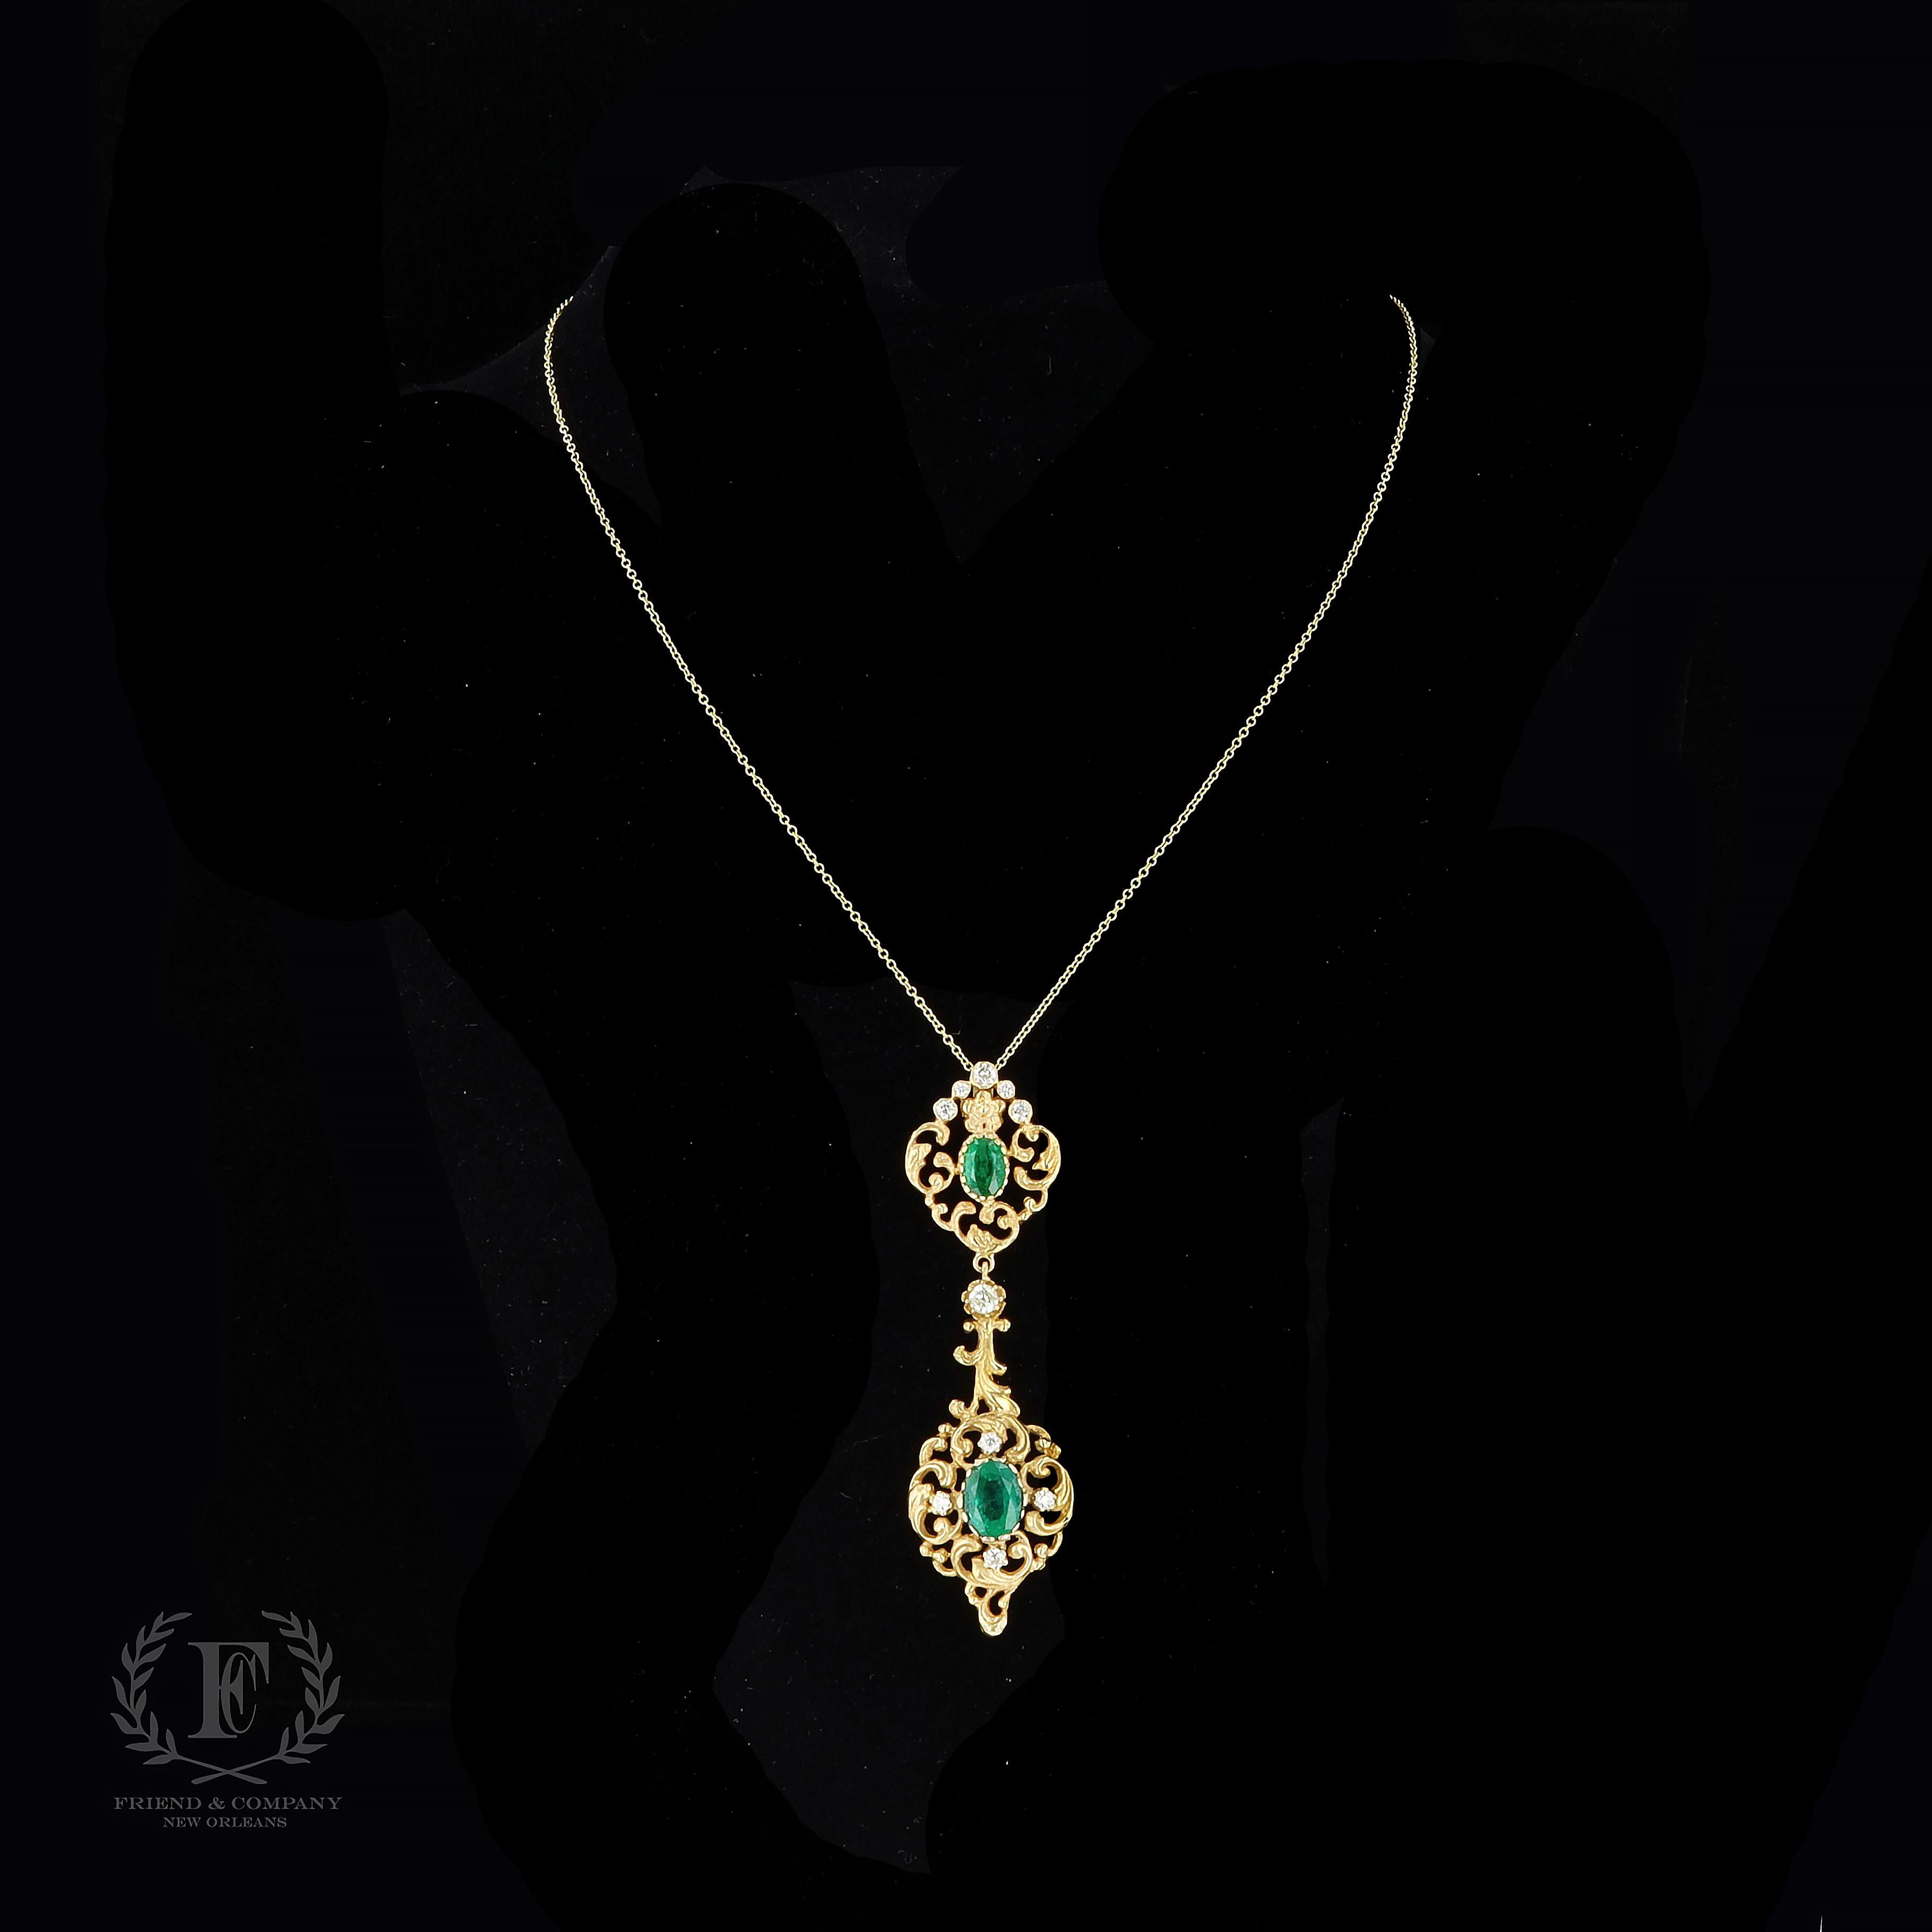 A necklace fit for a queen. This marvelous pendant necklace features oval cut green emeralds that weigh approximately 2.14 carats. The green emeralds are accentuated by old mine cut diamonds. The pendant measures 60 millimeters by 17.5 millimeters.